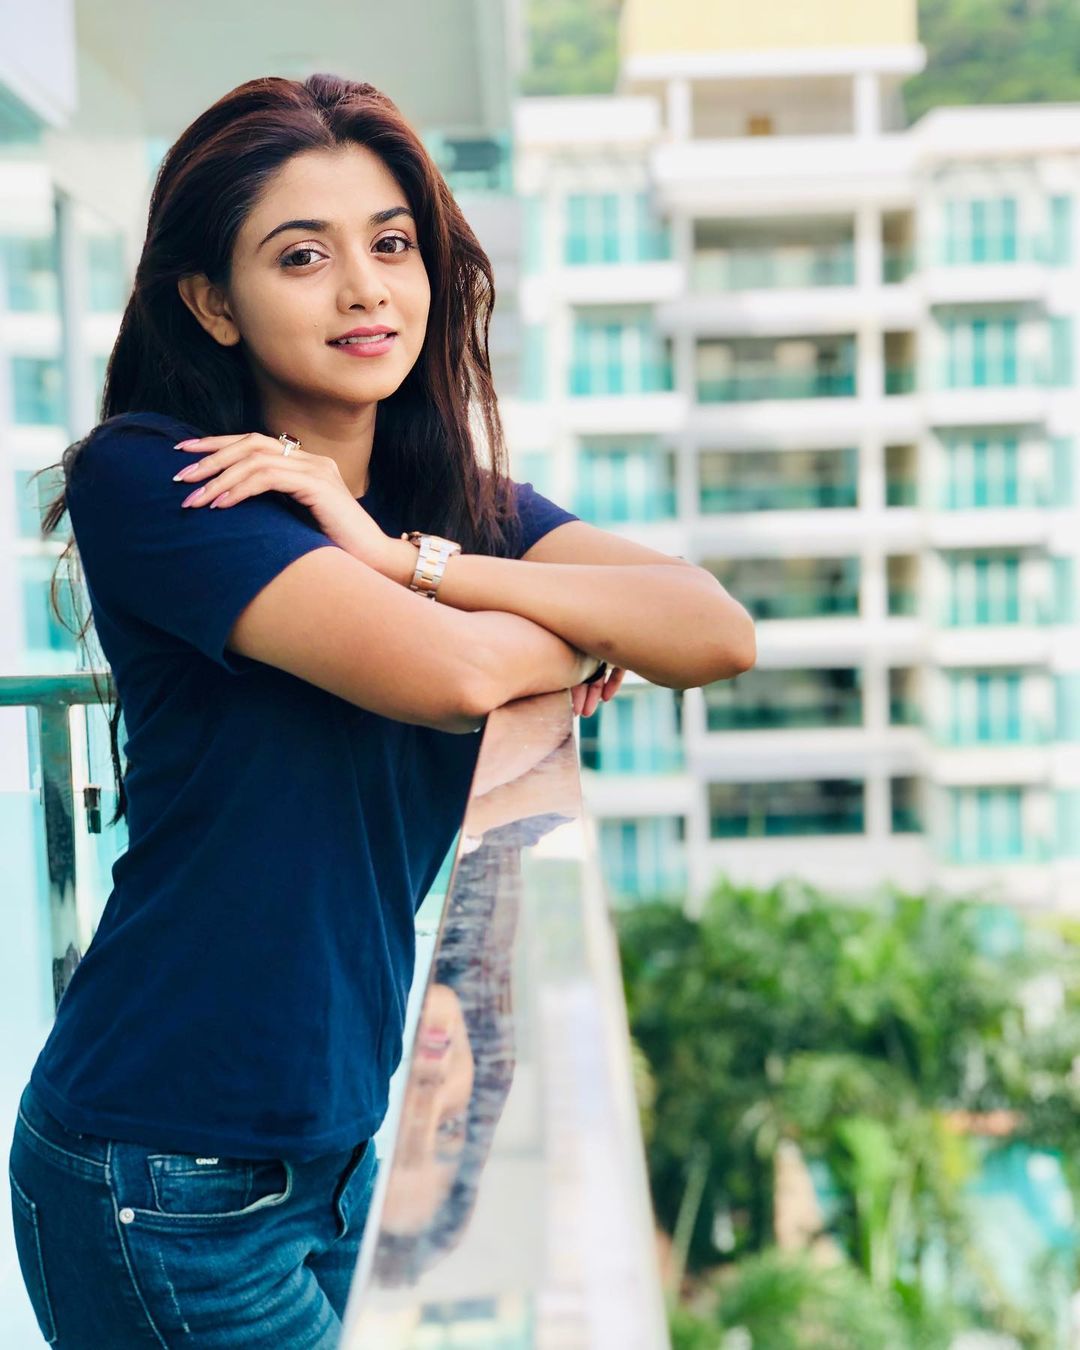 Tanvi Dogra Wiki, Biography, Body Measurements, Social Life, Success Story, Age, Boyfriend, Family, Career, Education, and Net Worth